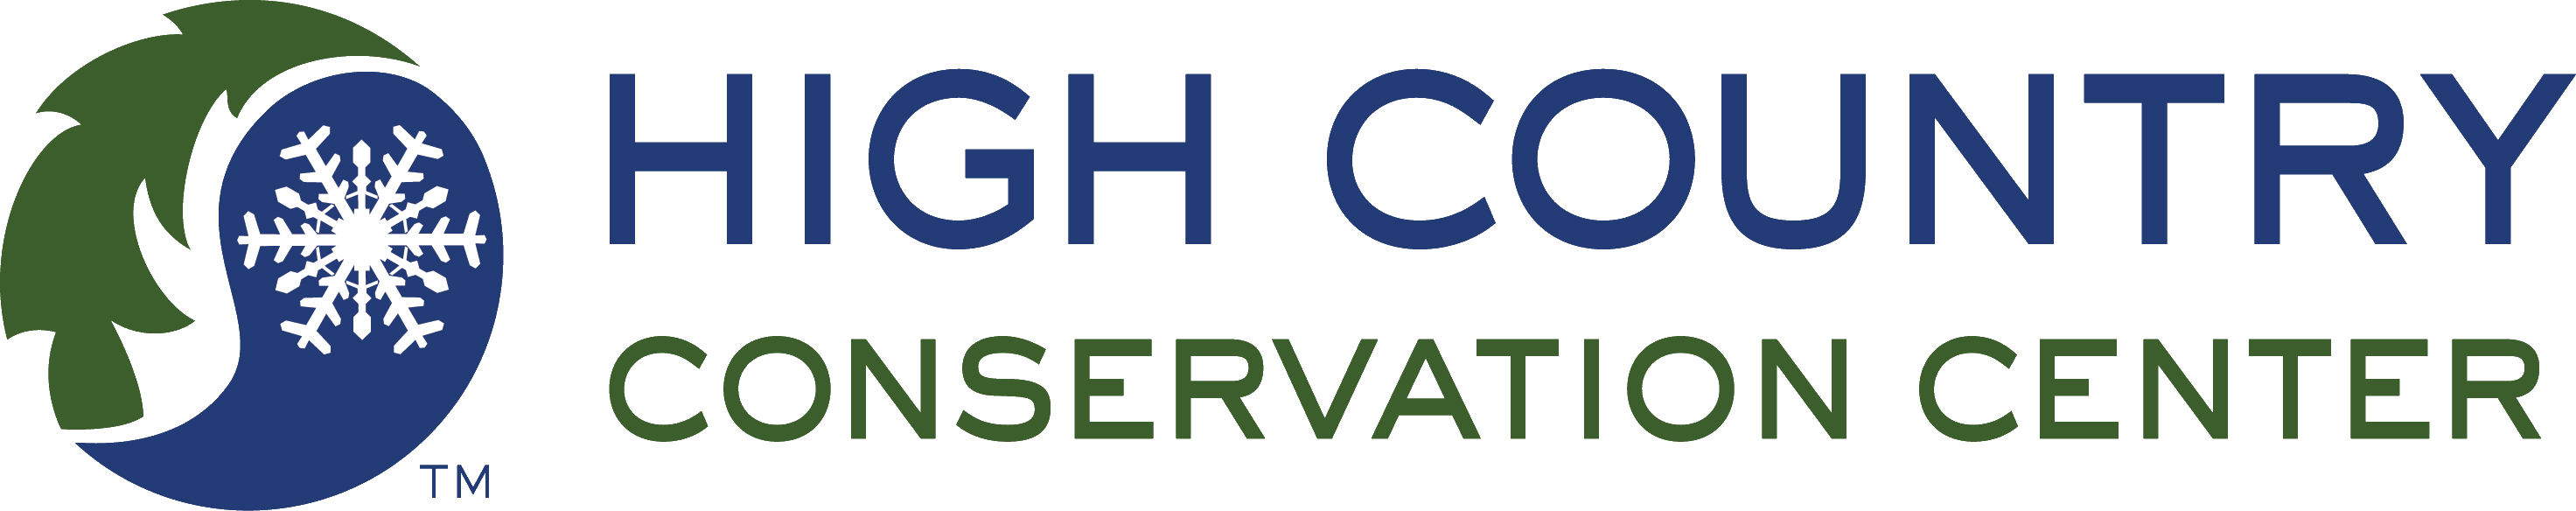 High Country Conservation Center company logo